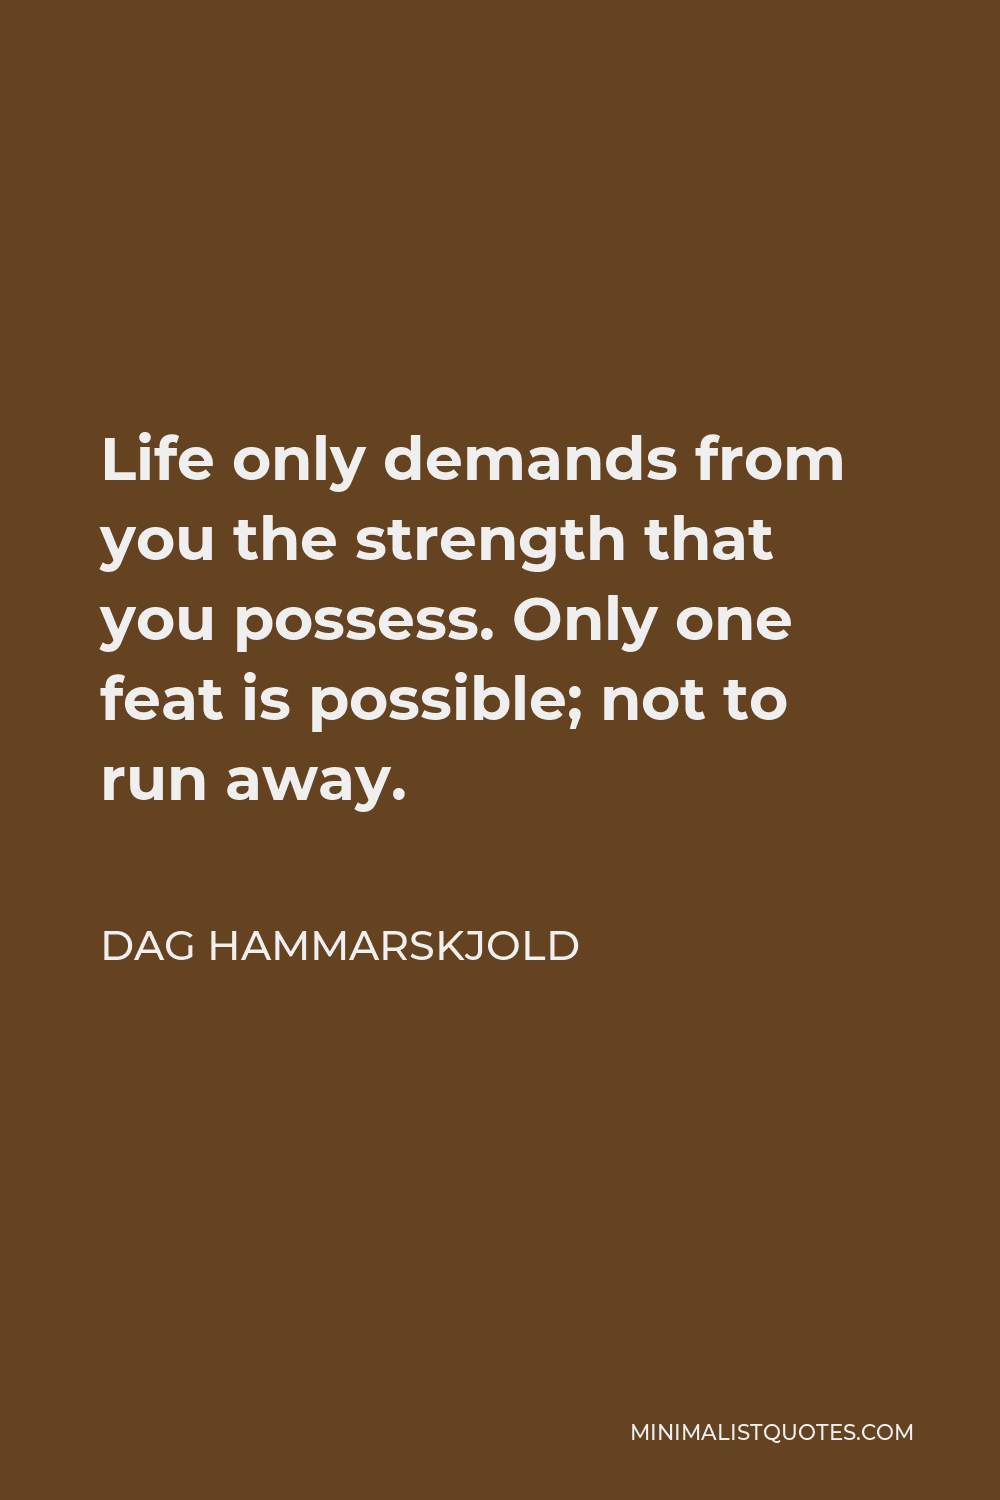 Dag Hammarskjold Quote - Life only demands from you the strength that you possess. Only one feat is possible; not to run away.